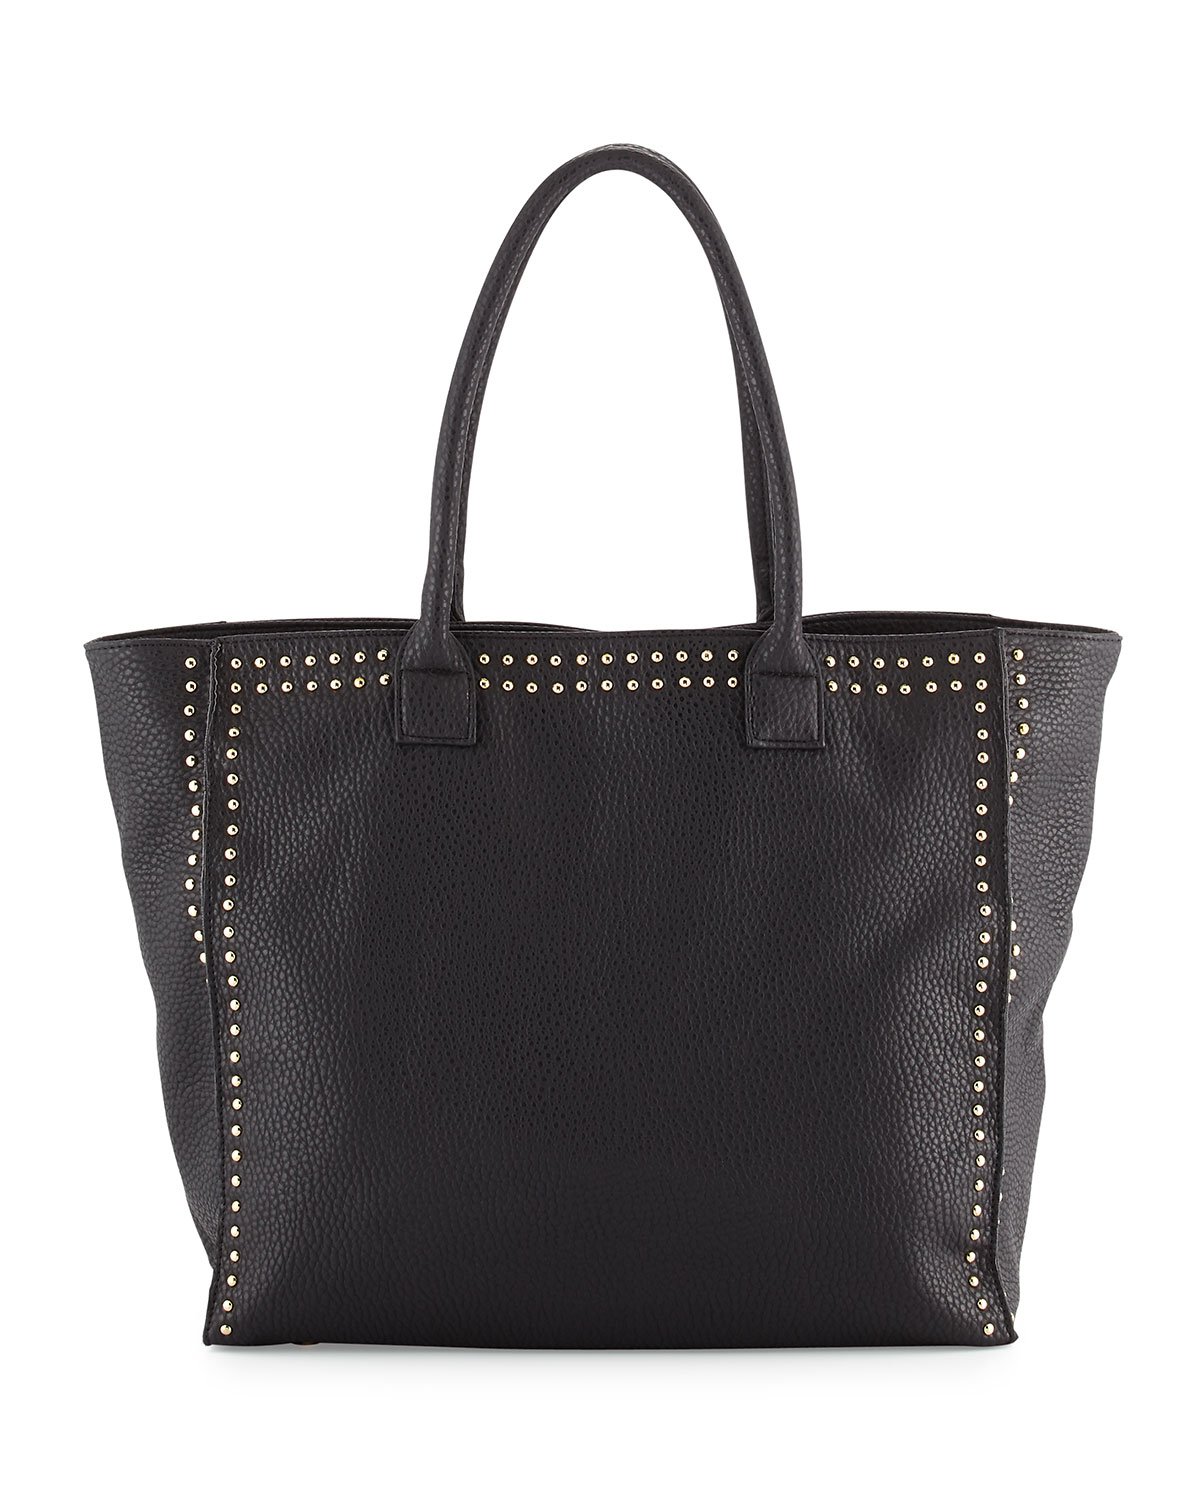 Lyst - Neiman Marcus Studded-trim Faux-leather Tote Bag in Black